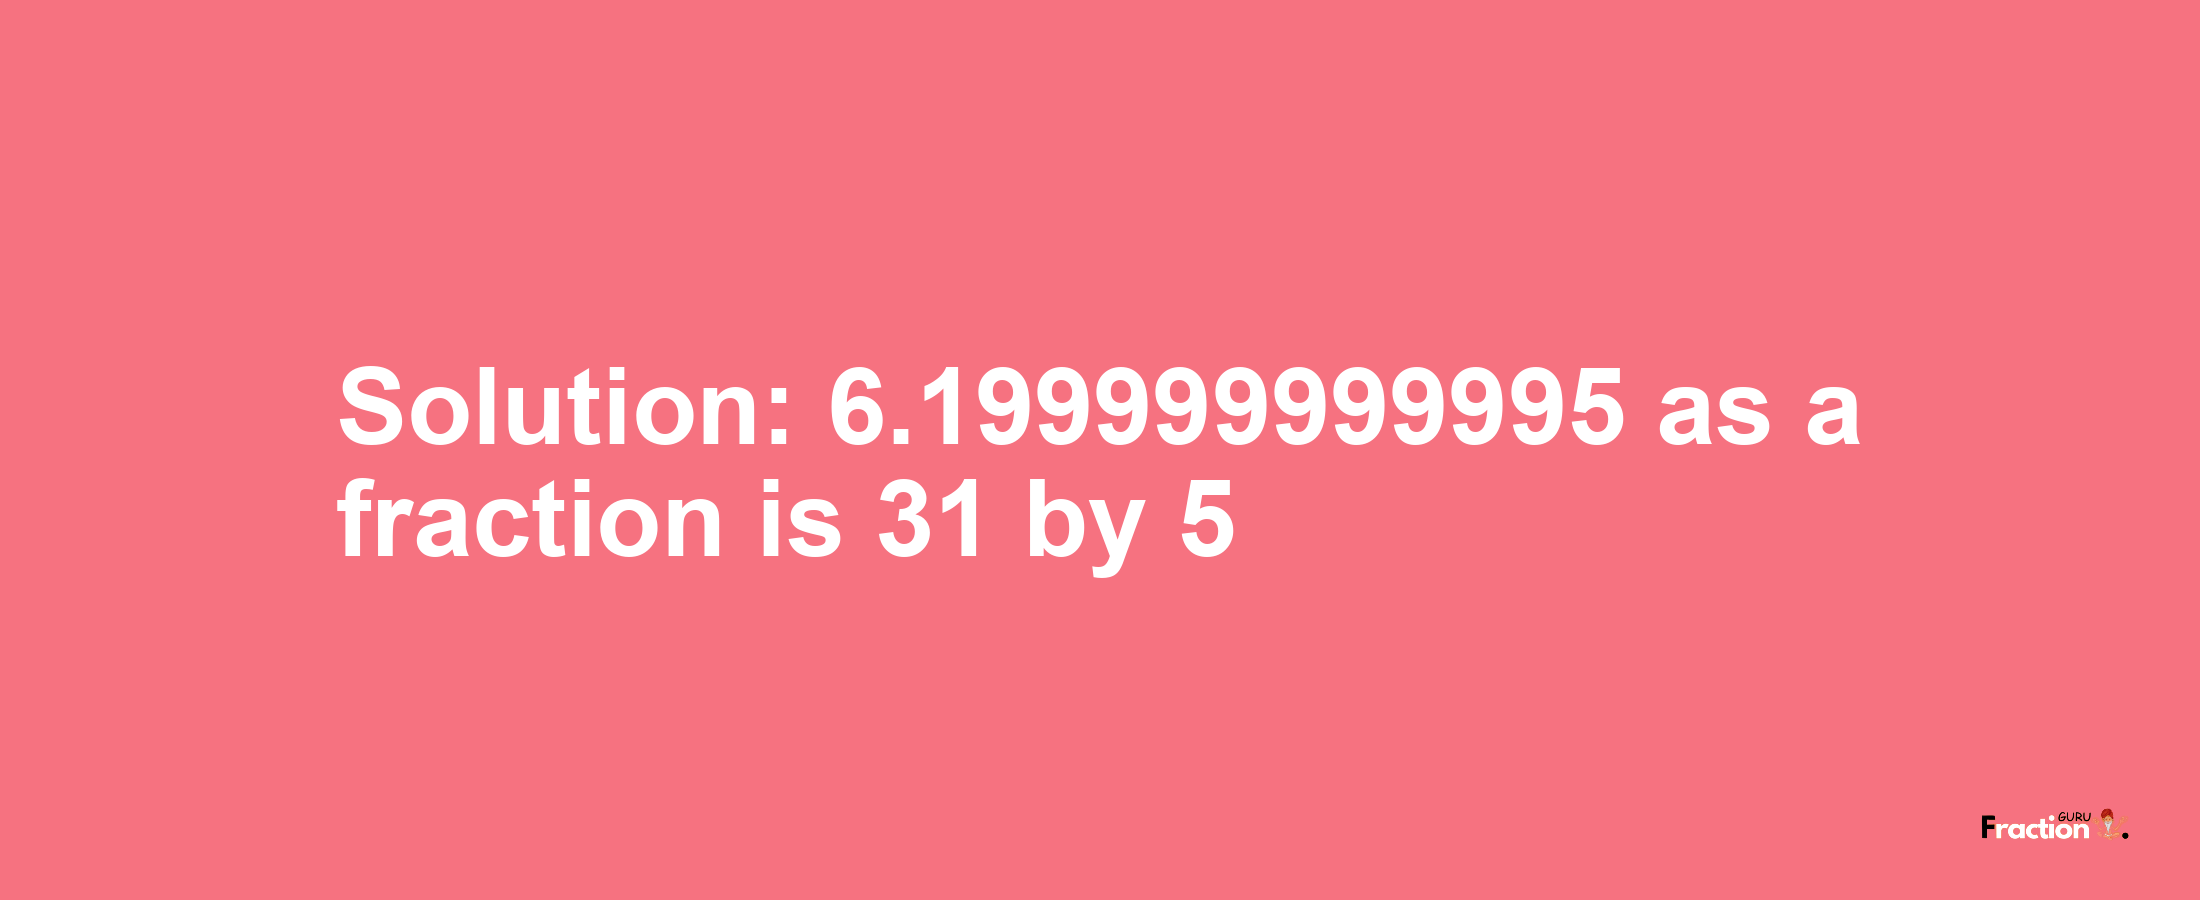 Solution:6.199999999995 as a fraction is 31/5